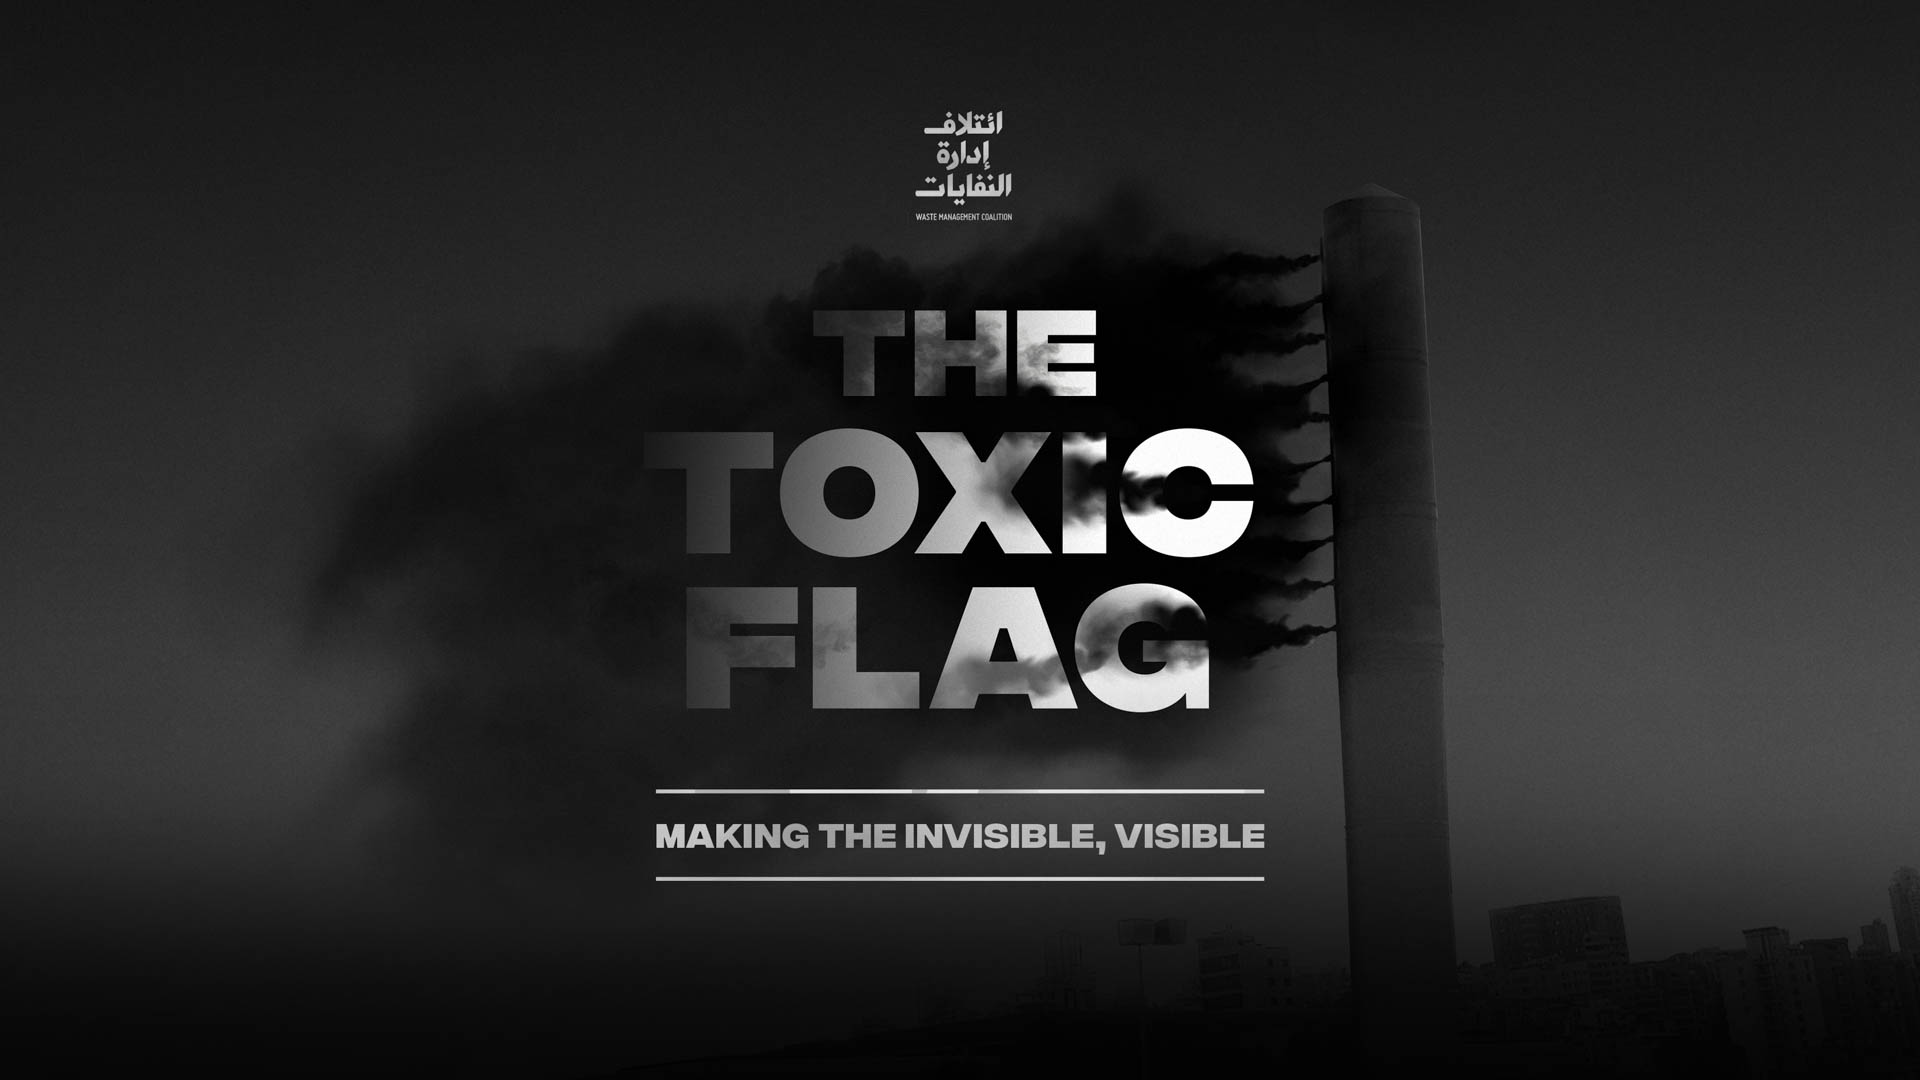 The Toxic Flag